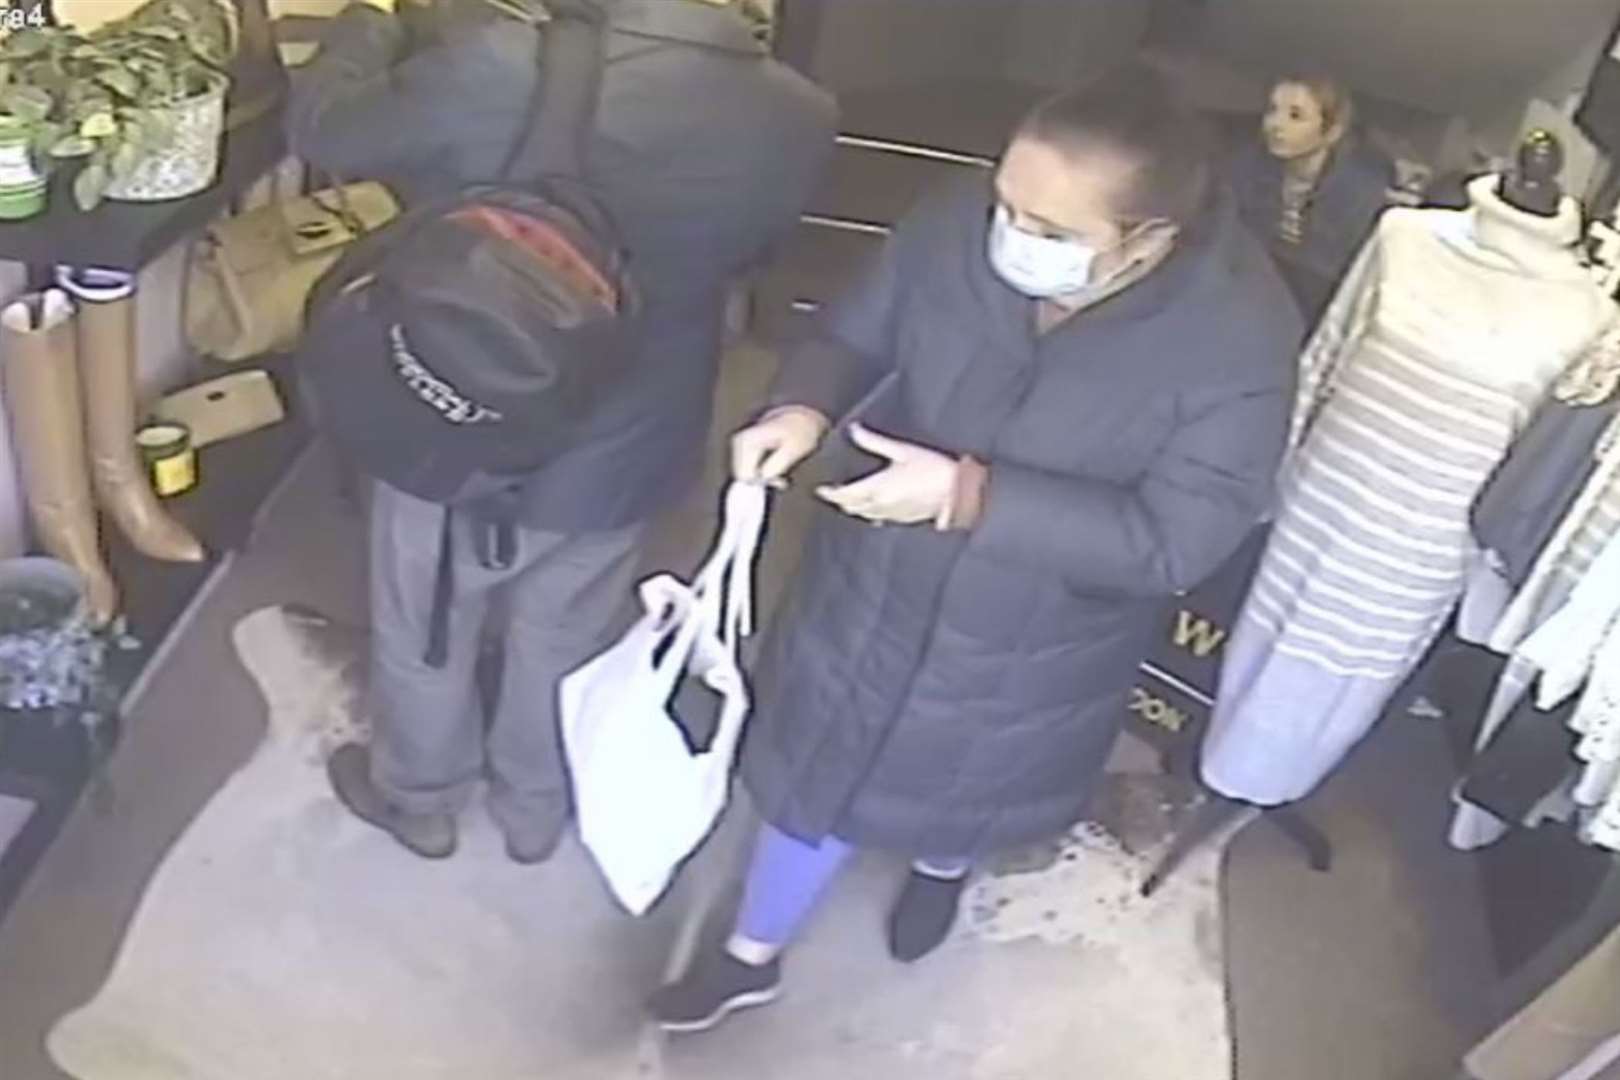 The woman was caught on CCTV leaving the shop